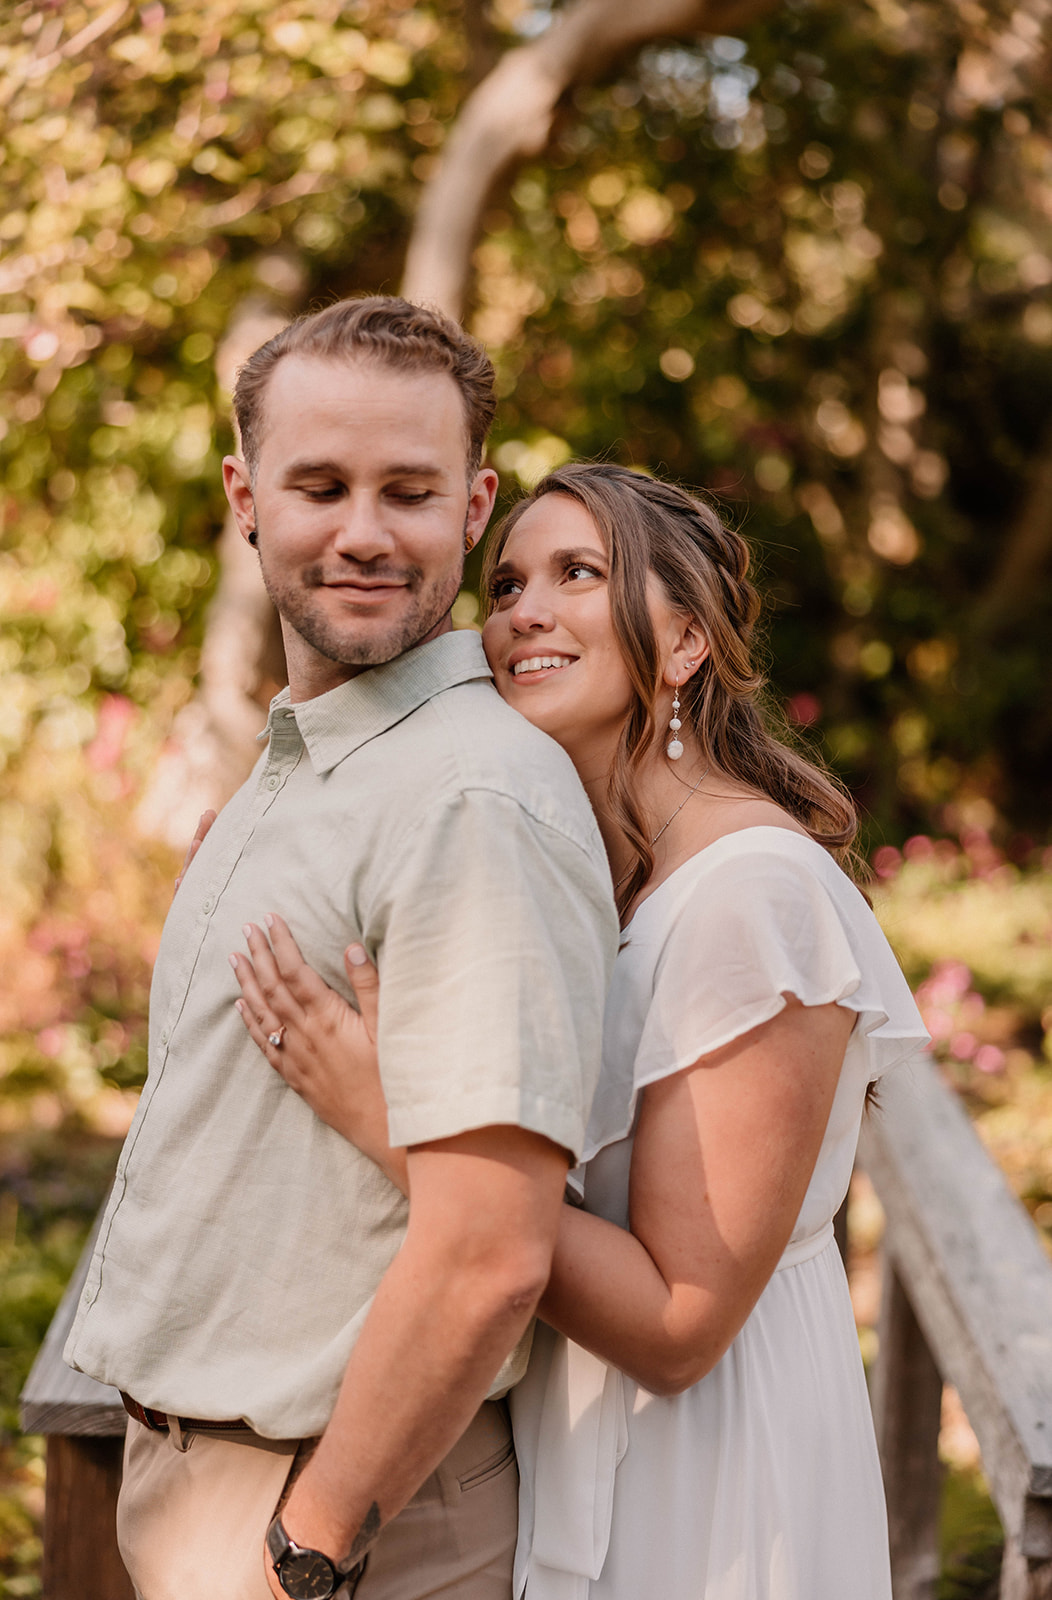 Outdoor Engagement Photos In Fort Bragg